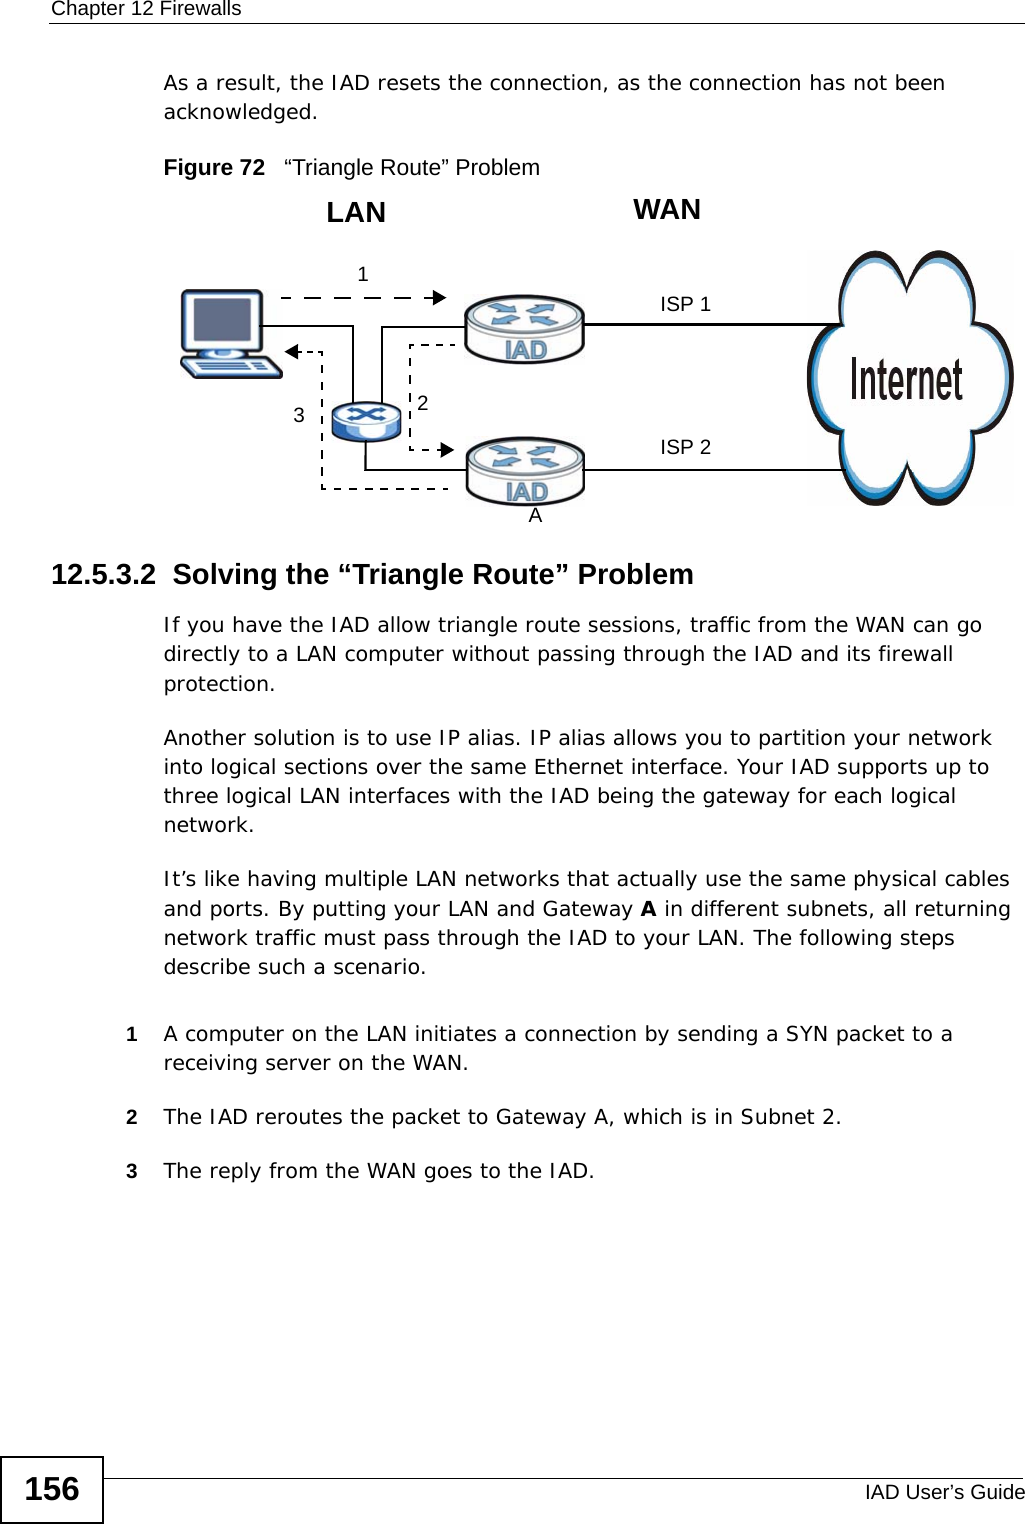 Chapter 12 FirewallsIAD User’s Guide156As a result, the IAD resets the connection, as the connection has not been acknowledged.Figure 72   “Triangle Route” Problem12.5.3.2  Solving the “Triangle Route” ProblemIf you have the IAD allow triangle route sessions, traffic from the WAN can go directly to a LAN computer without passing through the IAD and its firewall protection. Another solution is to use IP alias. IP alias allows you to partition your network into logical sections over the same Ethernet interface. Your IAD supports up to three logical LAN interfaces with the IAD being the gateway for each logical network. It’s like having multiple LAN networks that actually use the same physical cables and ports. By putting your LAN and Gateway A in different subnets, all returning network traffic must pass through the IAD to your LAN. The following steps describe such a scenario.1A computer on the LAN initiates a connection by sending a SYN packet to a receiving server on the WAN. 2The IAD reroutes the packet to Gateway A, which is in Subnet 2. 3The reply from the WAN goes to the IAD. 123WANLANAISP 1ISP 2